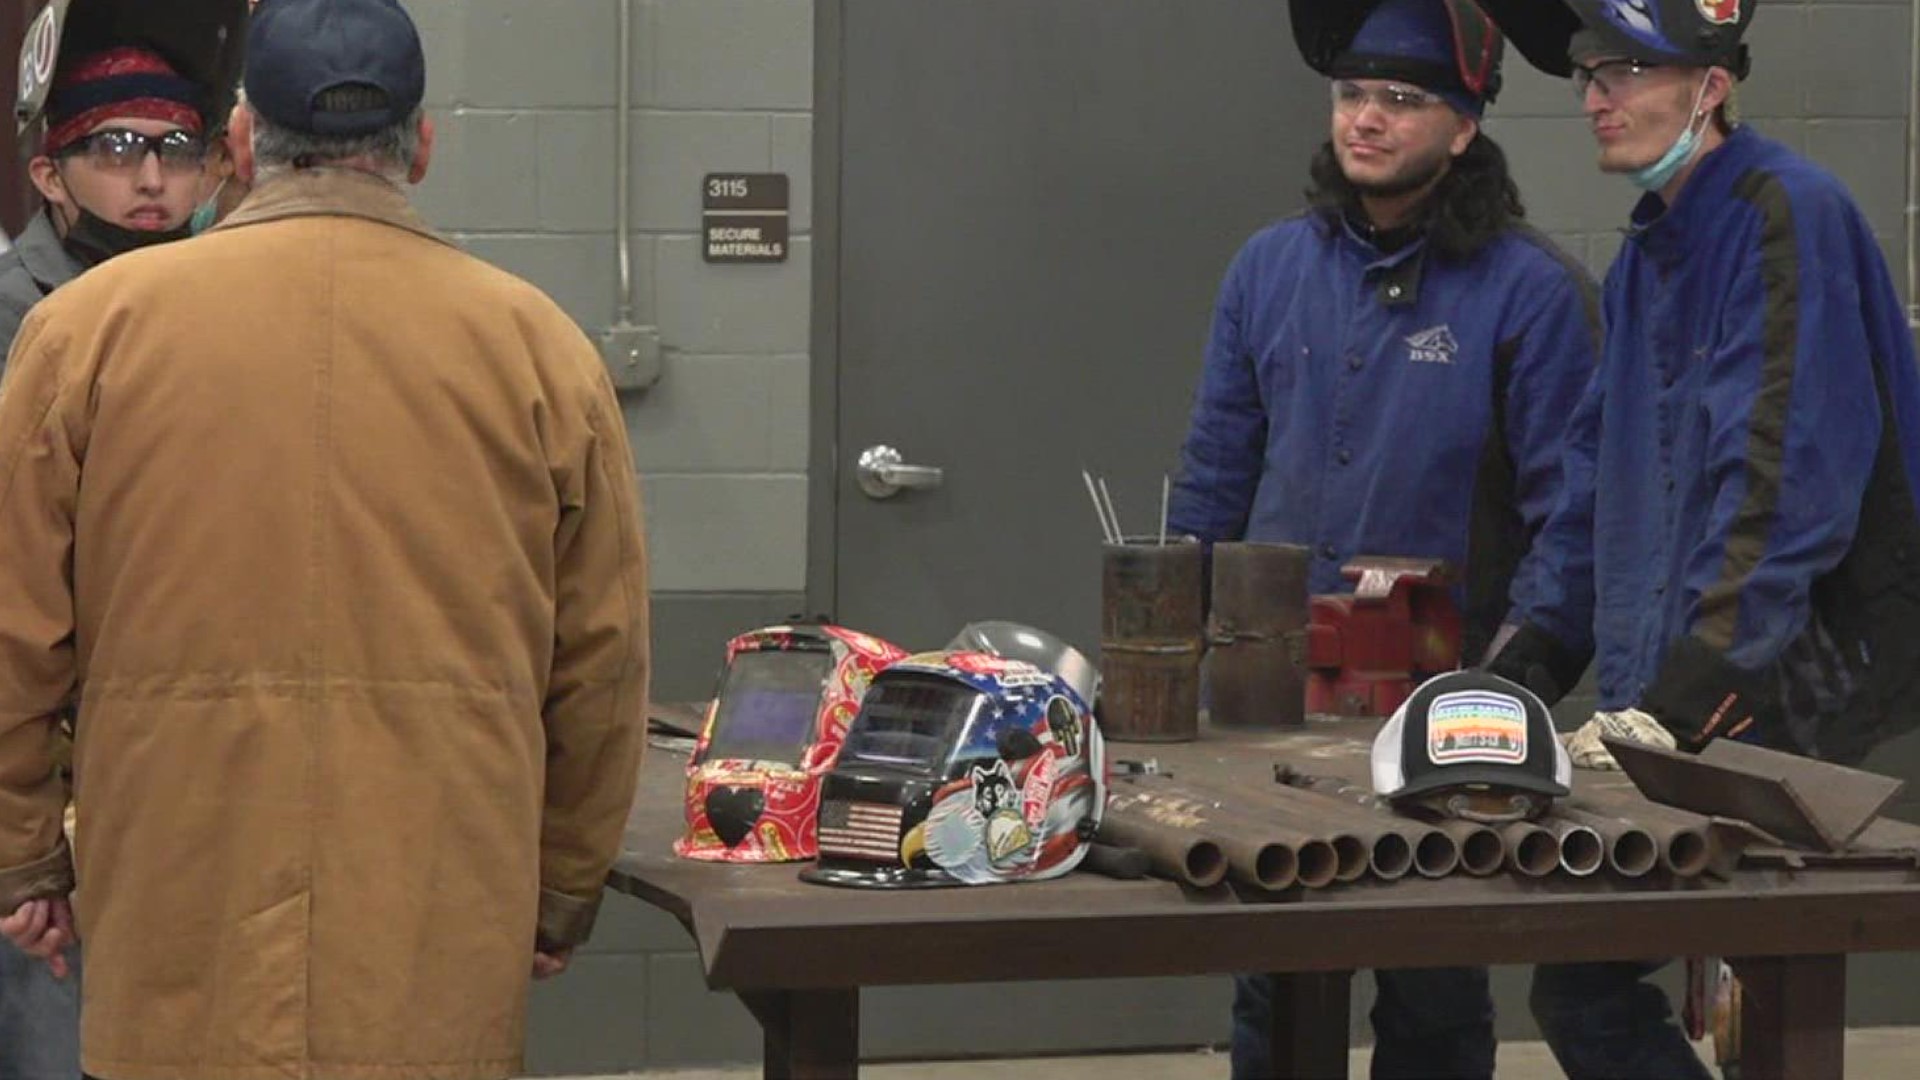 While the competition focuses on welding, life skills such as time management and discipline are also  taught to contestants, to prepare them for the real world.